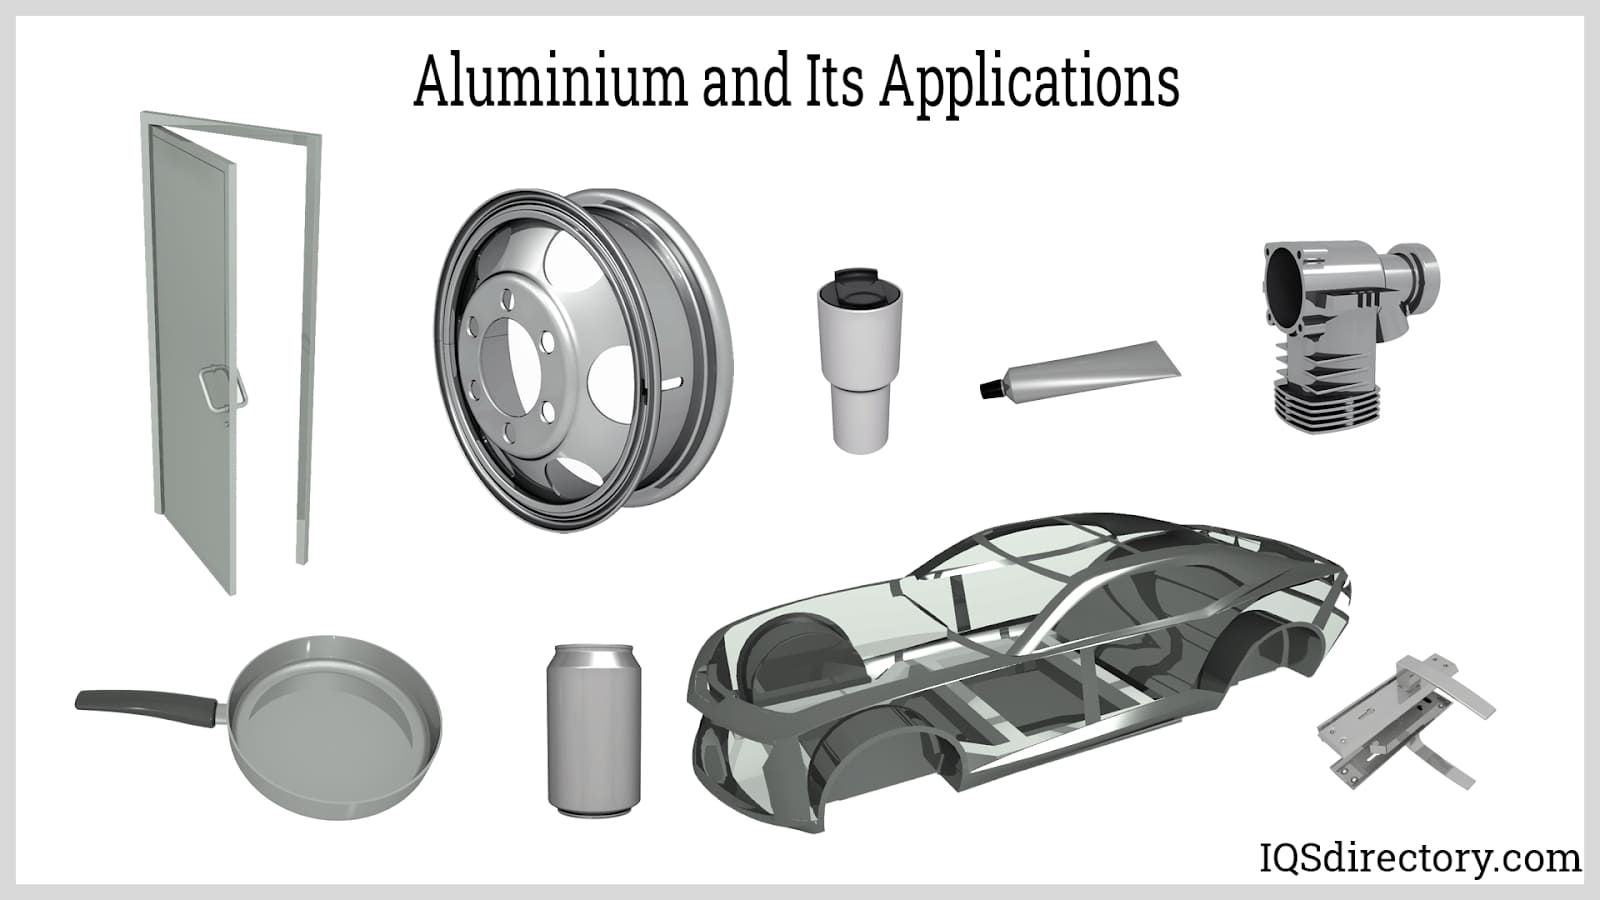 Aluminum Tubing & Piping: Types, Applications, Benefits, and Manufacturing